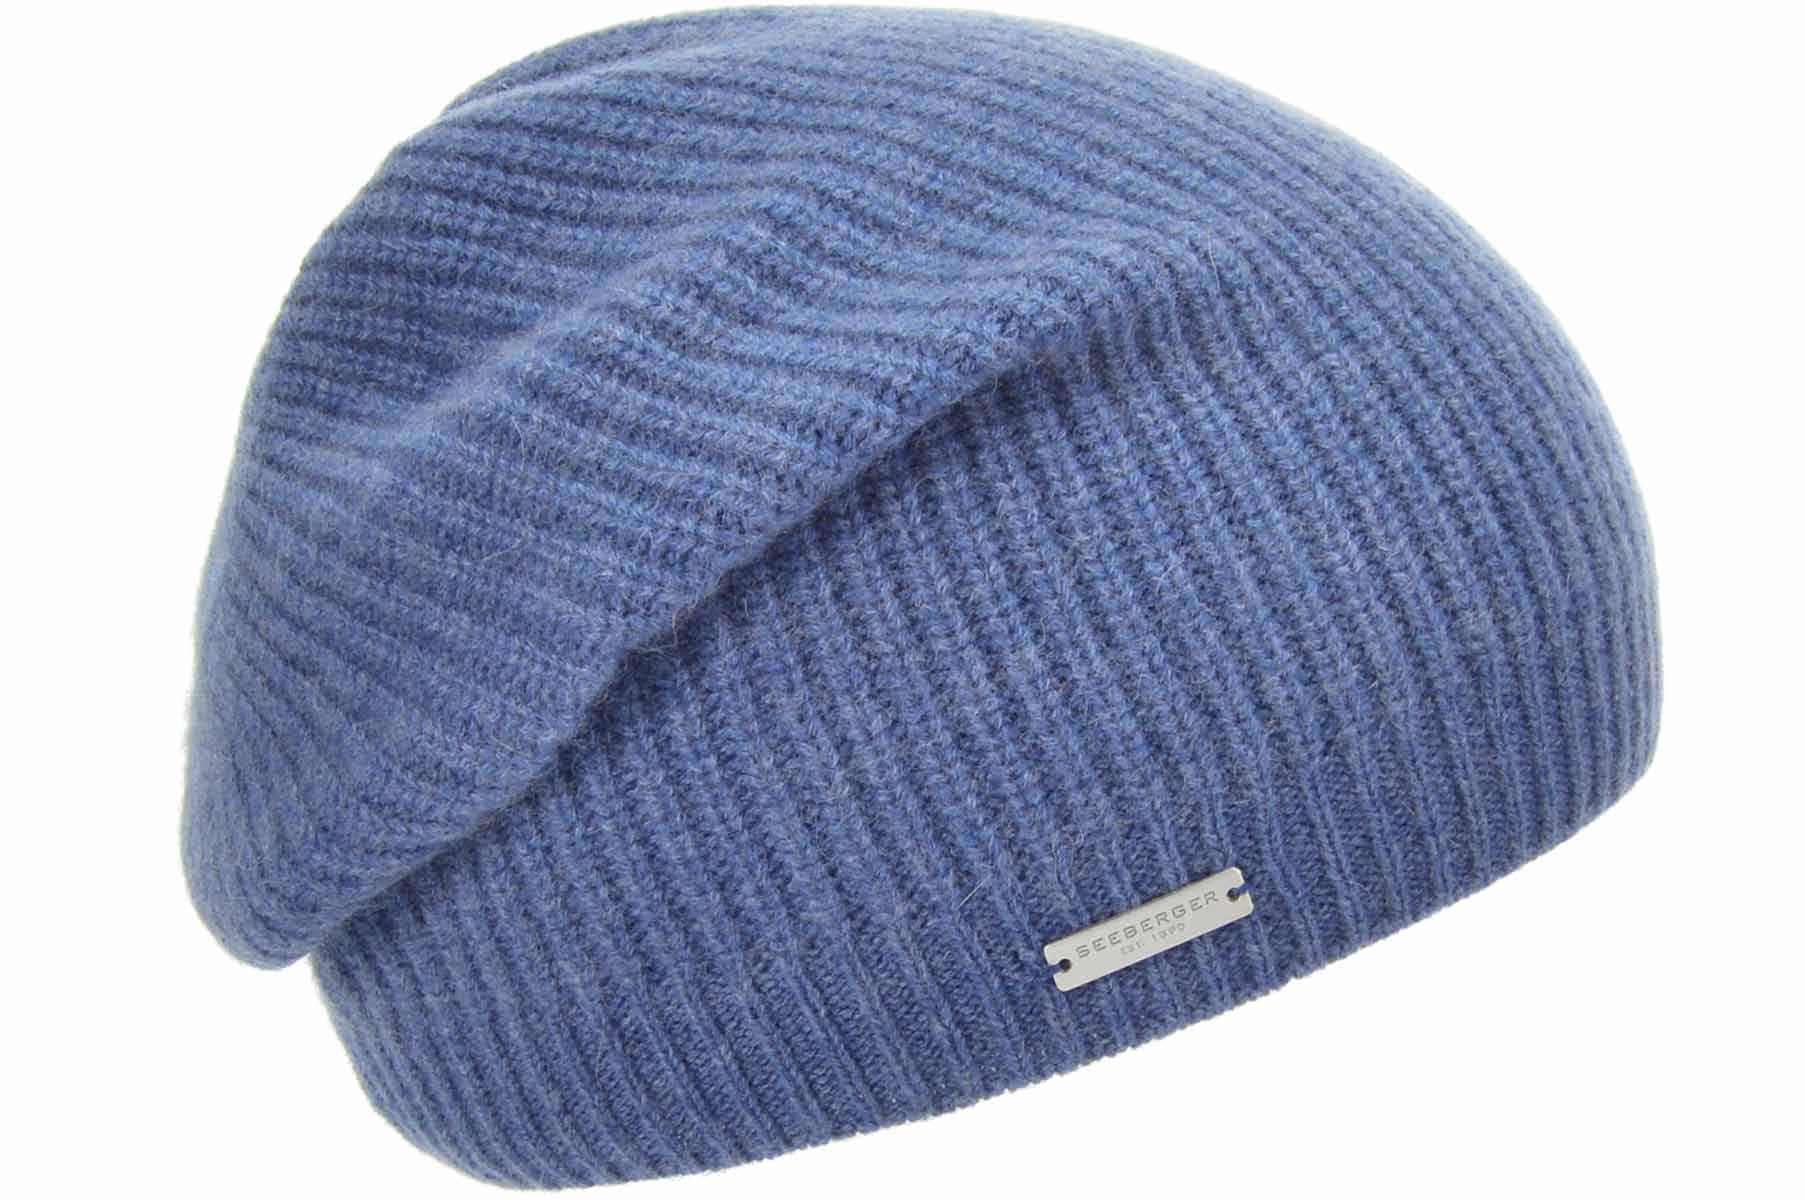 Picture for category Beanies/Gloves